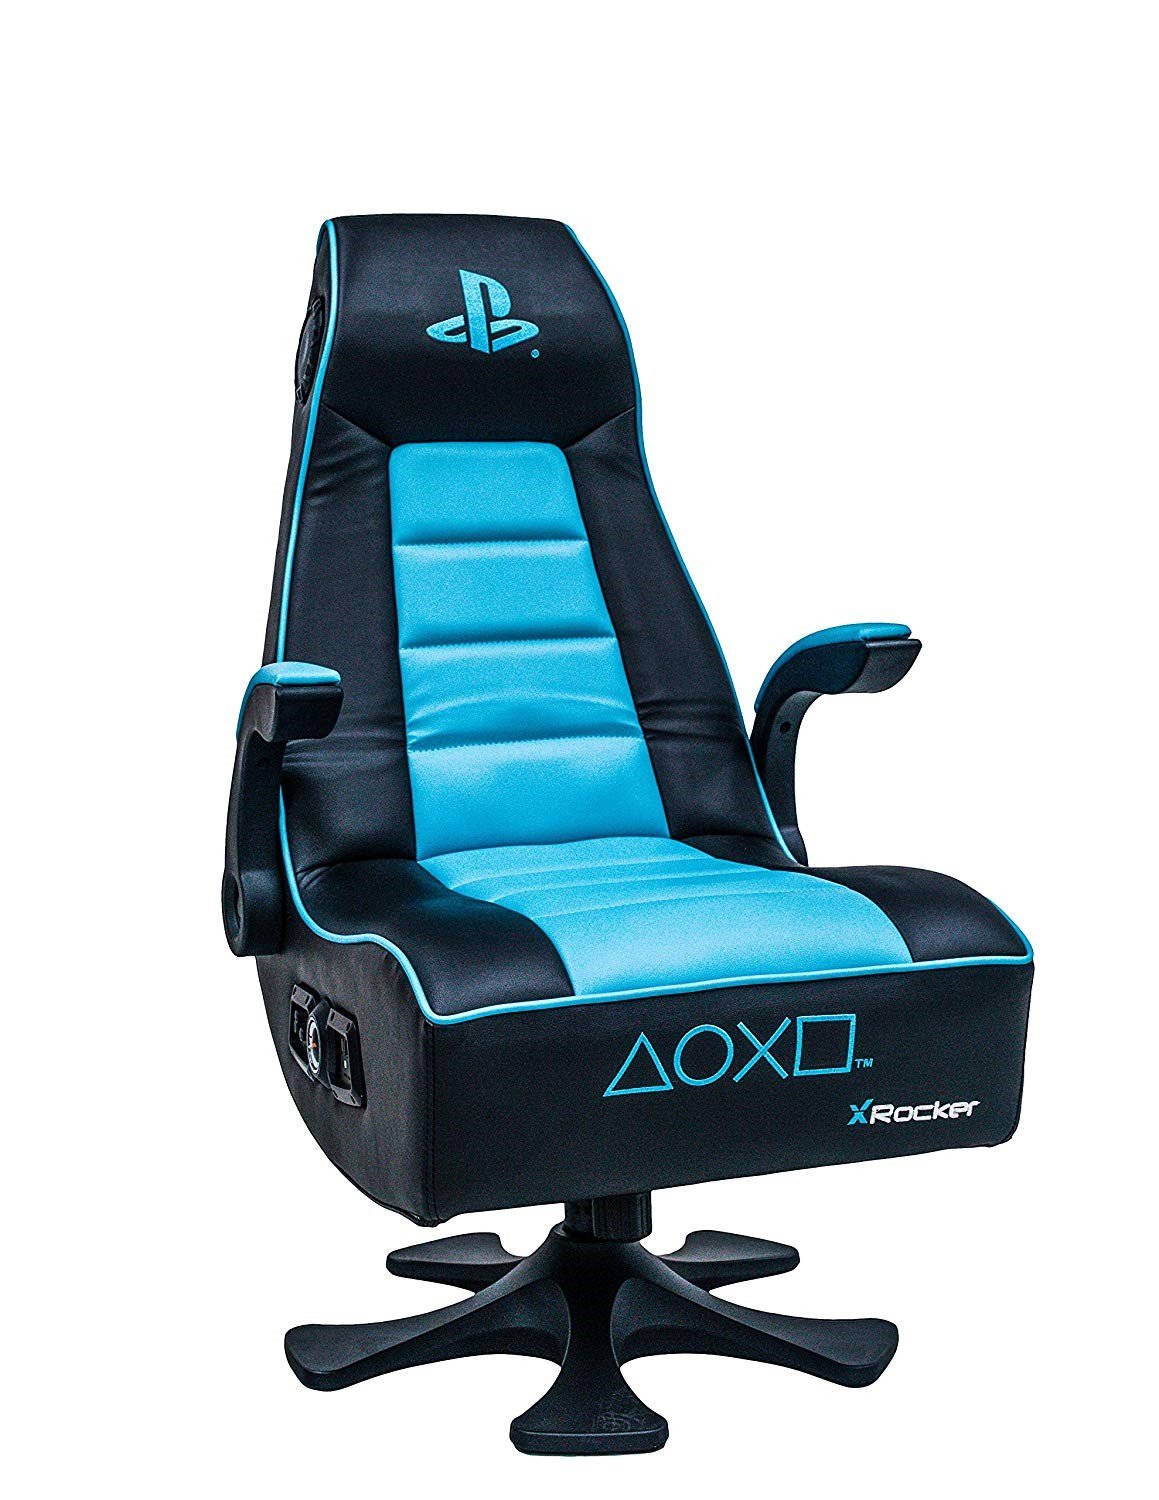 X Rocker PlayStation Infiniti 2.1 Gaming Chair with Speakers - 5106001